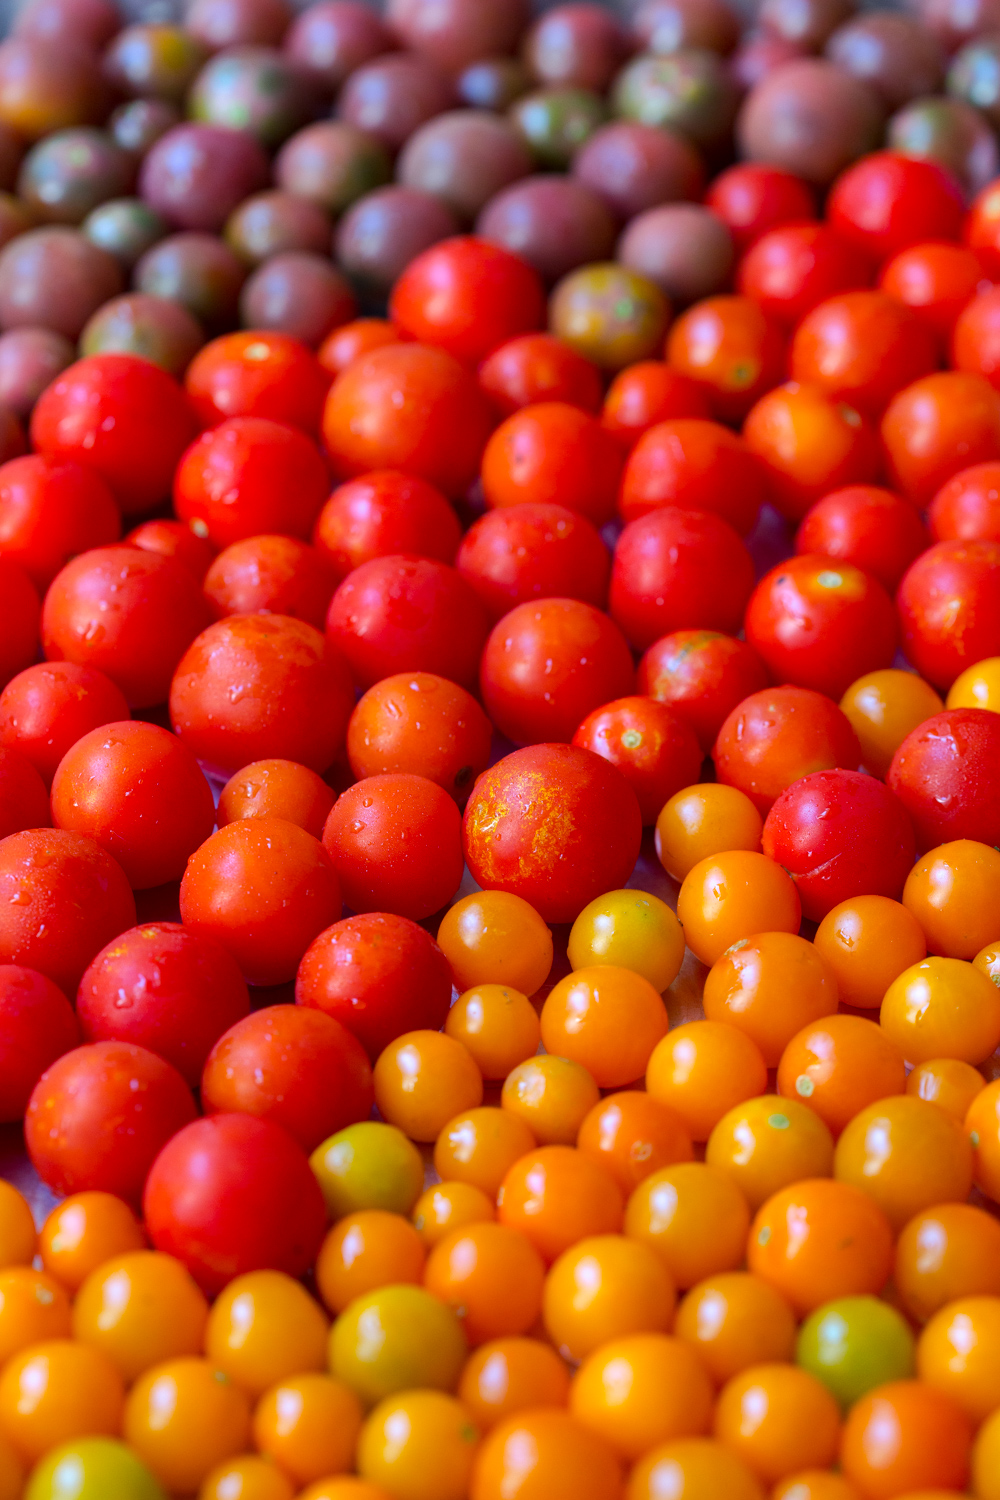 A close up of multi-colored cherry tomatoes on a tray from the Santa Barbara Farmers Market